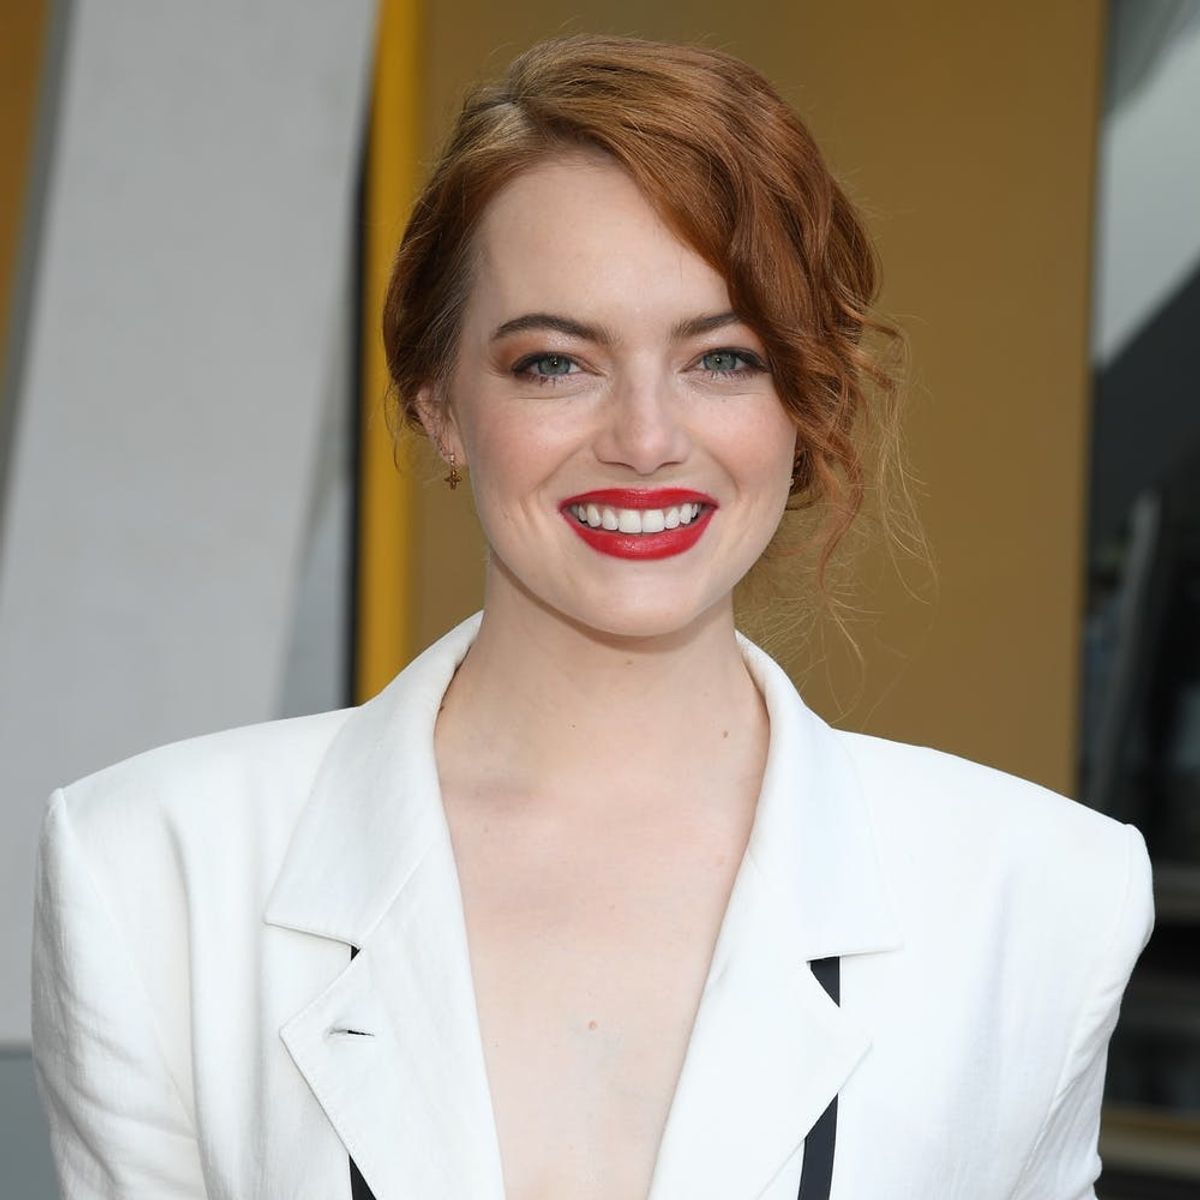 Emma Stone Reveals How Her Hopes and Dreams Have Changed as She Approaches 30